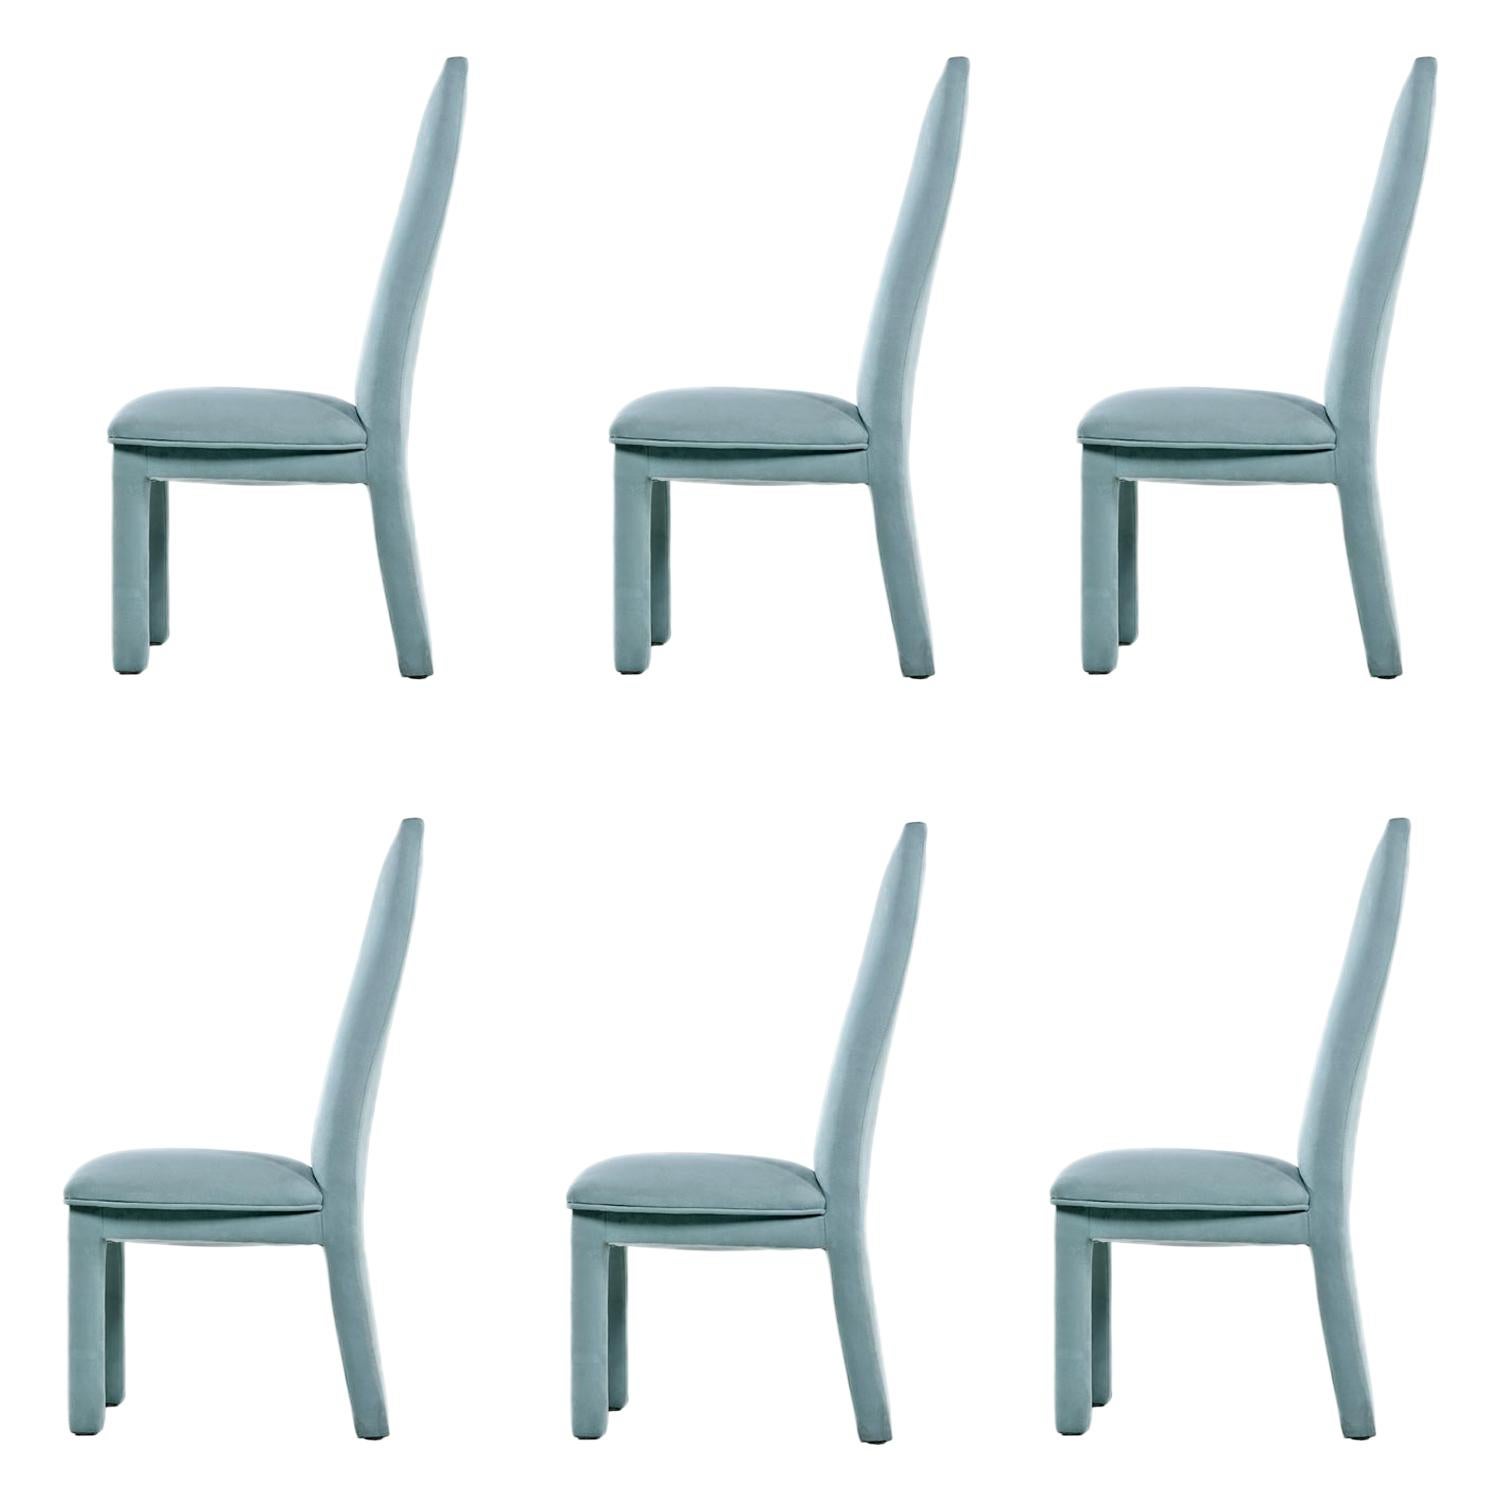 Set of six vintage high-back dining chairs updated with aqua blue microfiber upholstery. The chairs are ultra modern but exude an air of comfort with the plush fabric and amply padded form. The sharp angles of the Art Deco inspired silhouette are